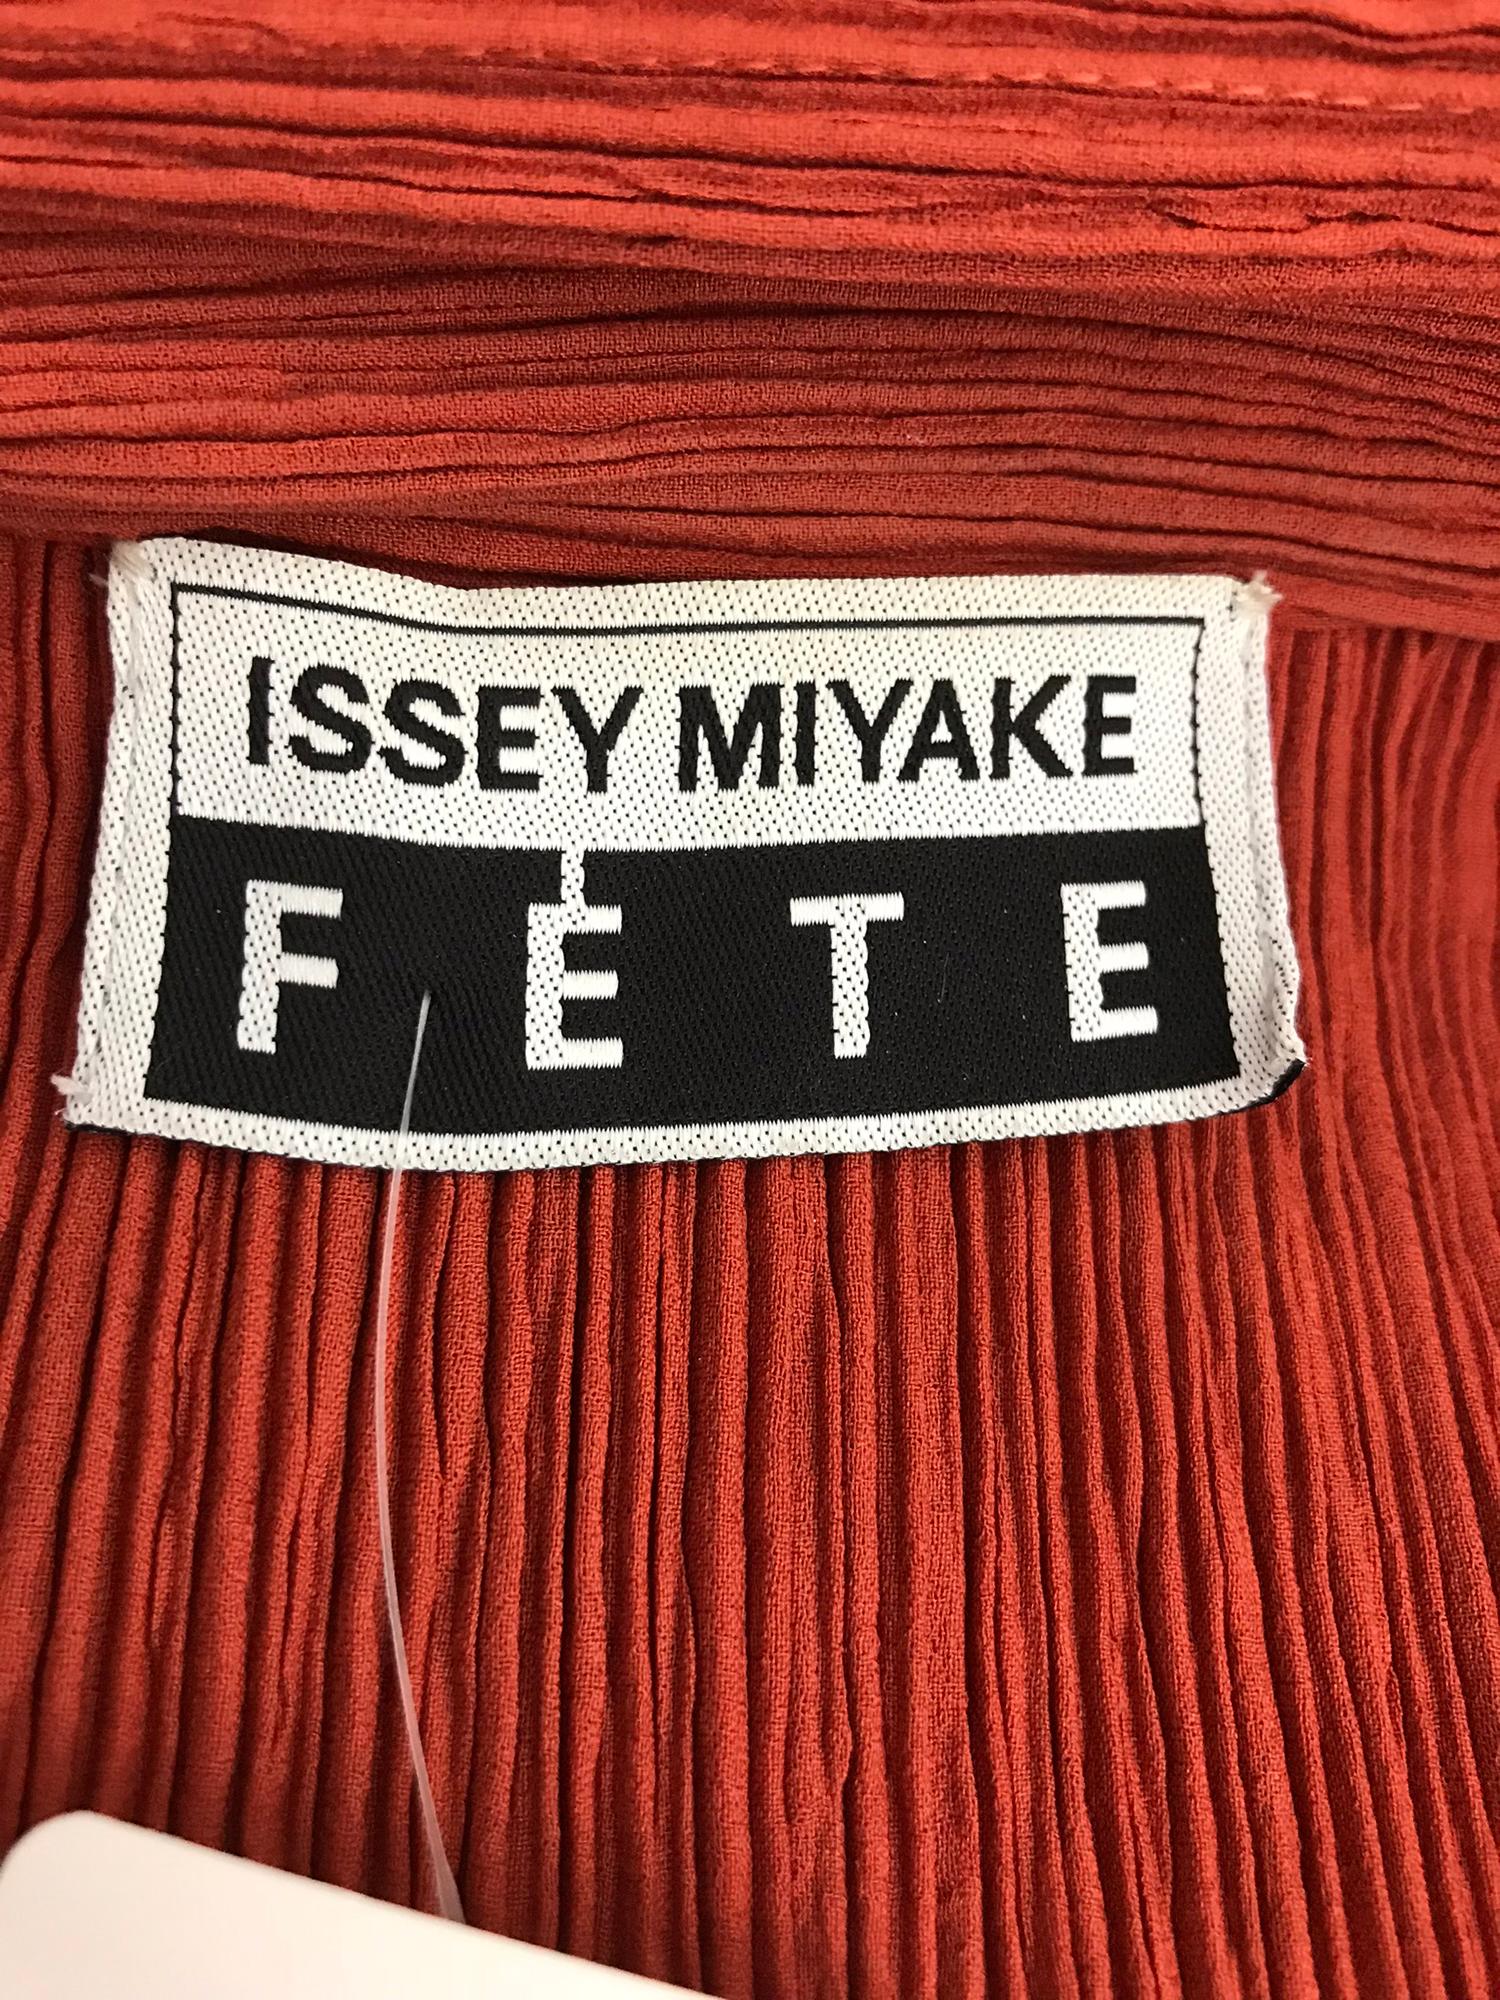 Issey Miyake Fete paprika pleated top and skirt set  7